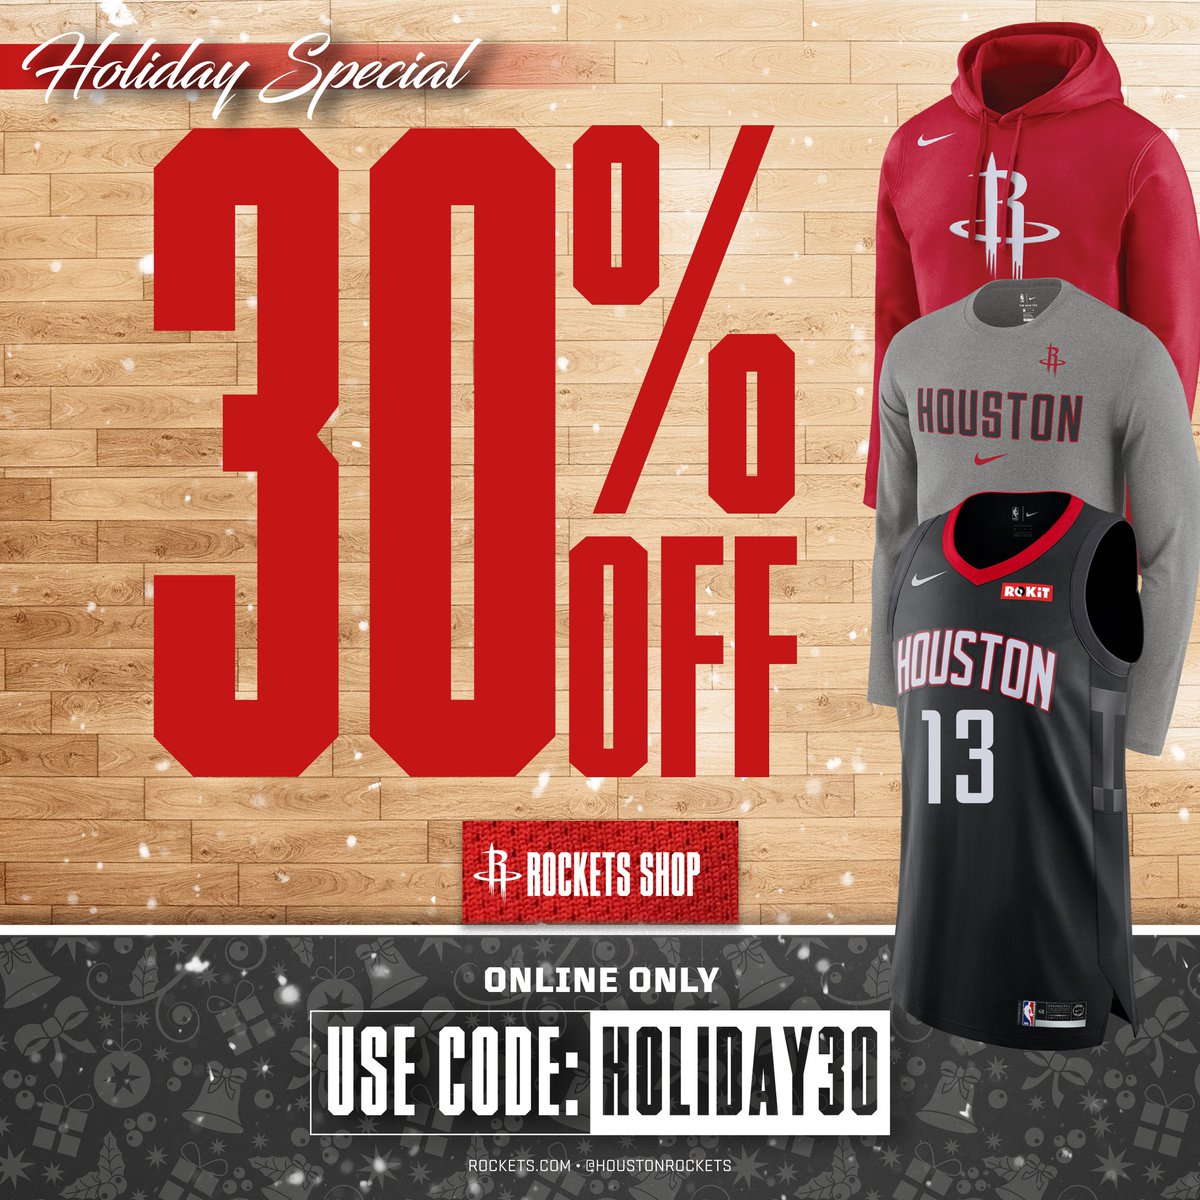 🚨 OUR HOLIDAY FLASH SALE ENDS AT MIDNIGHT! 🚨  EVERYTHING IS 30% OFF!  🚀 » RocketsShop.com https://t.co/NCsc9uJSUw